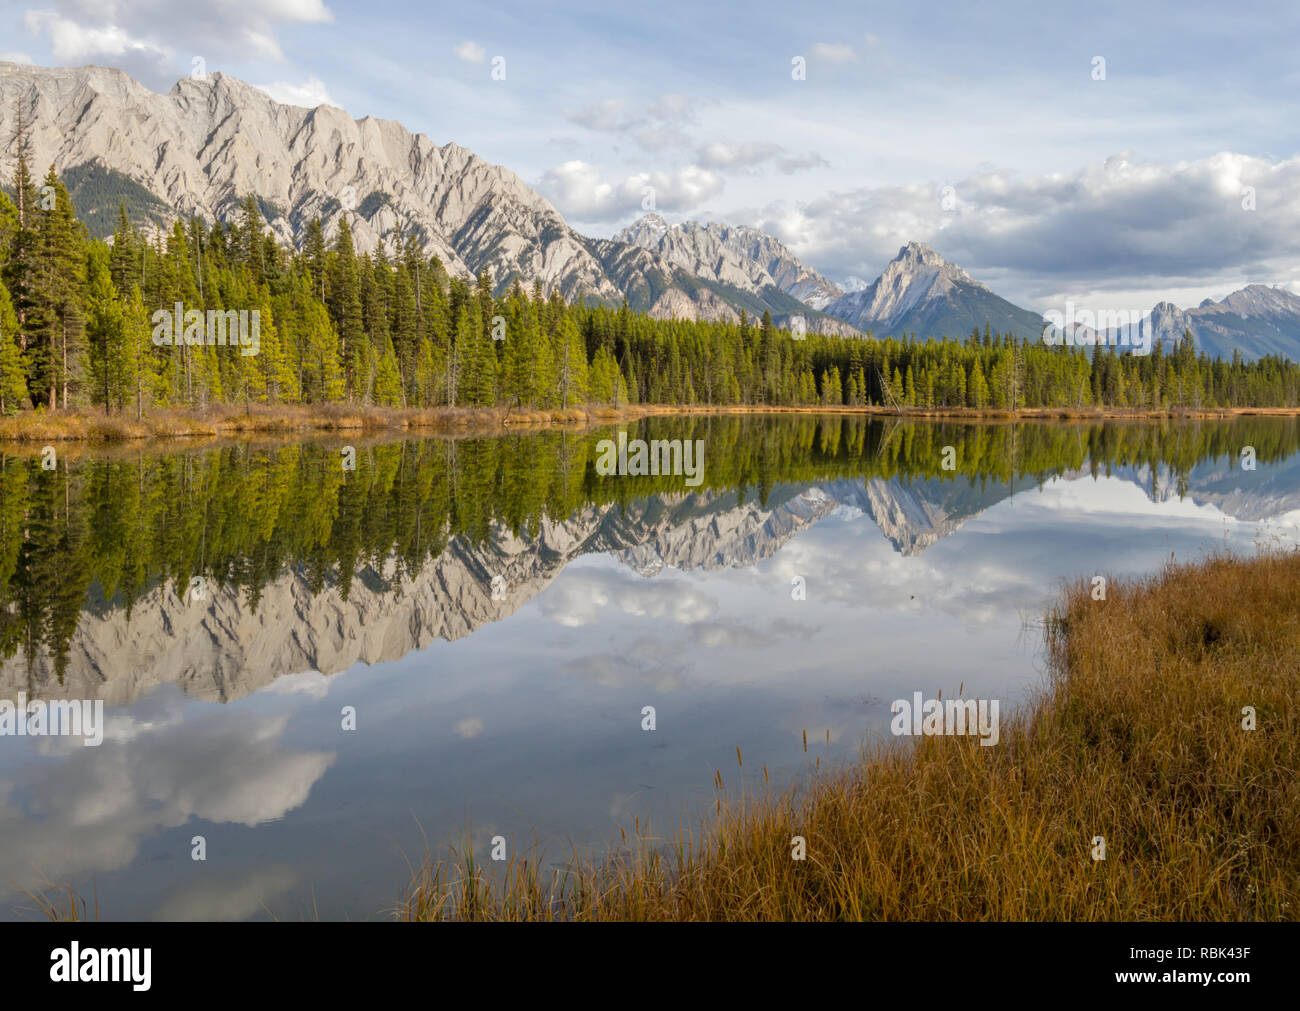 Mountains, trees, clouds and sky are reflected in water on beautiful autumn day in Kananaskis region of Alberta, Canada Stock Photo